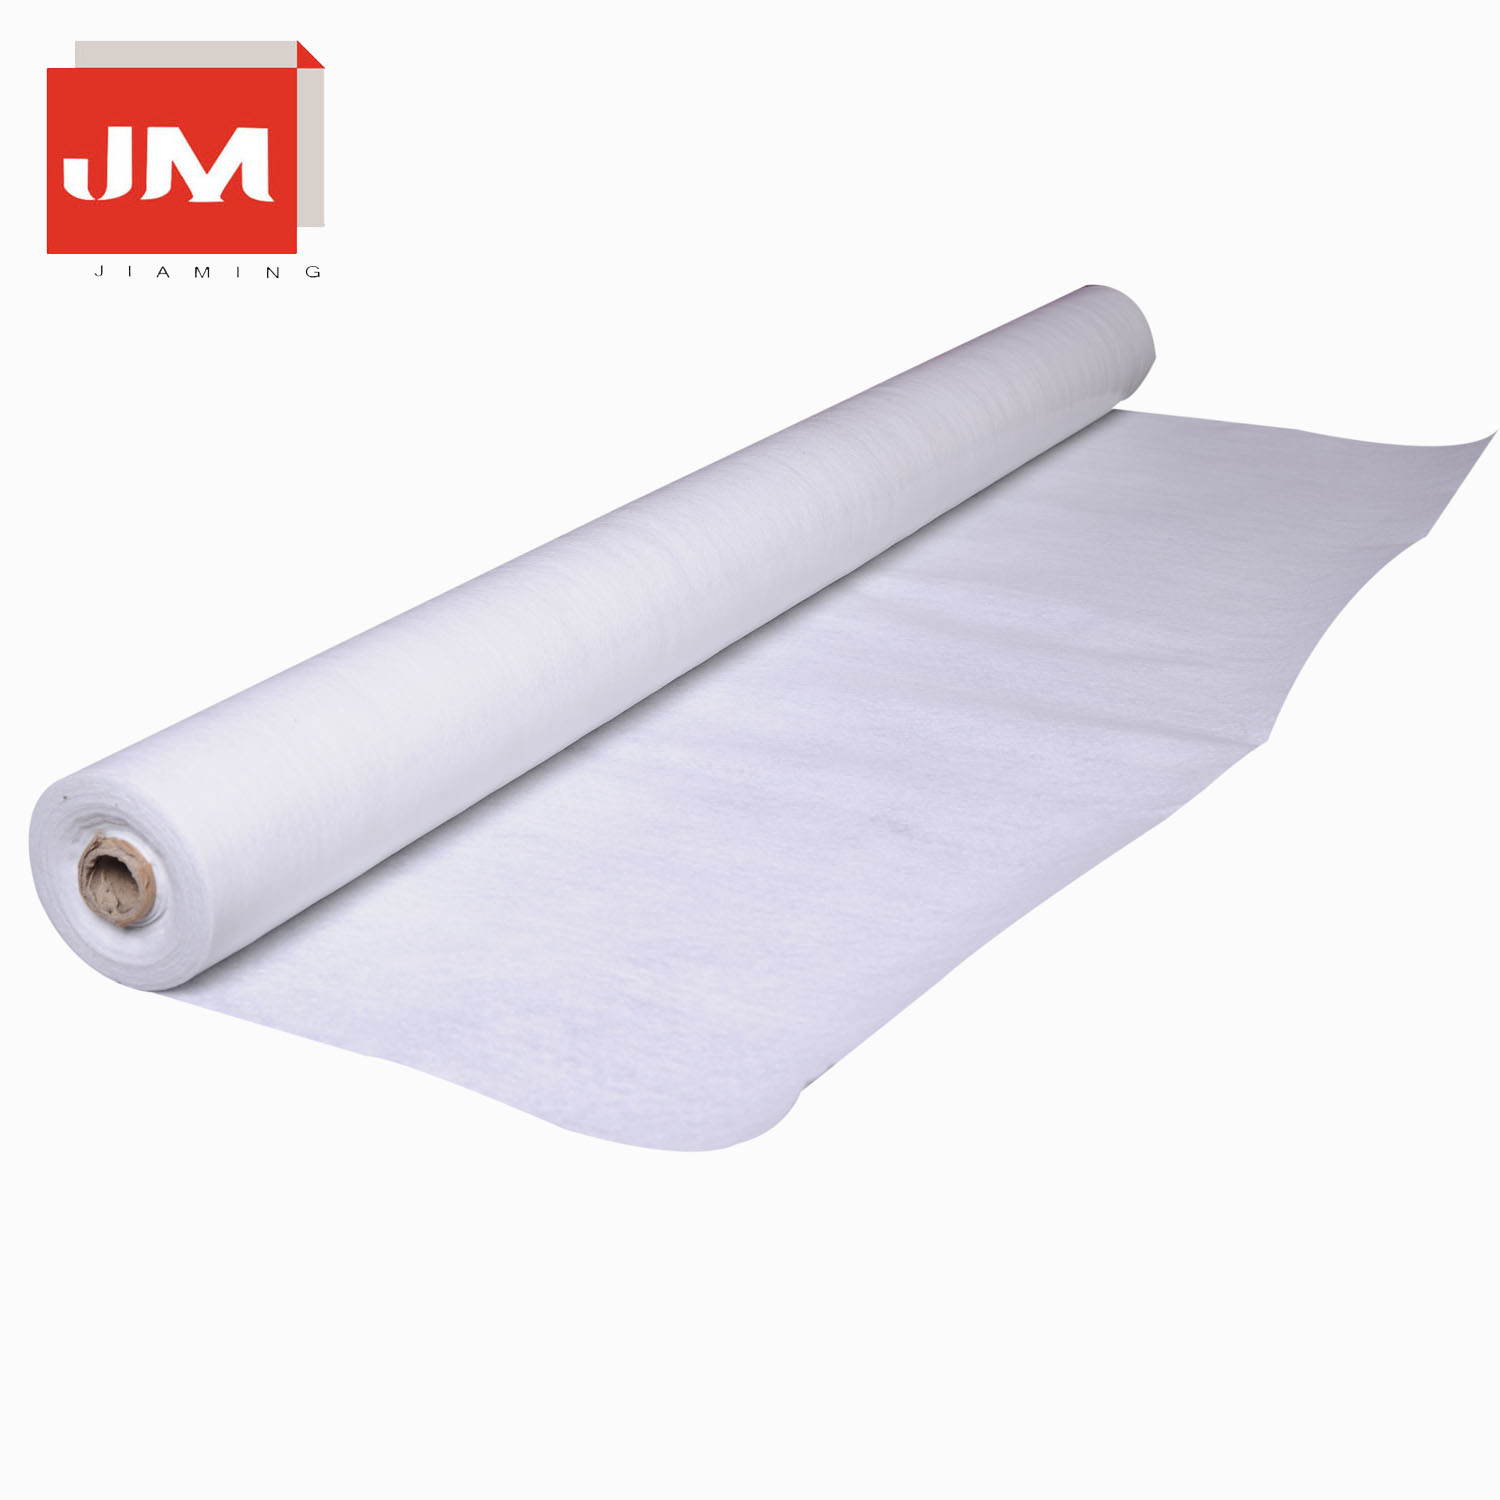 Spill Proof Sticky Felt with Adhesive Backing - China Cover Fleece, White  Sticky Felt